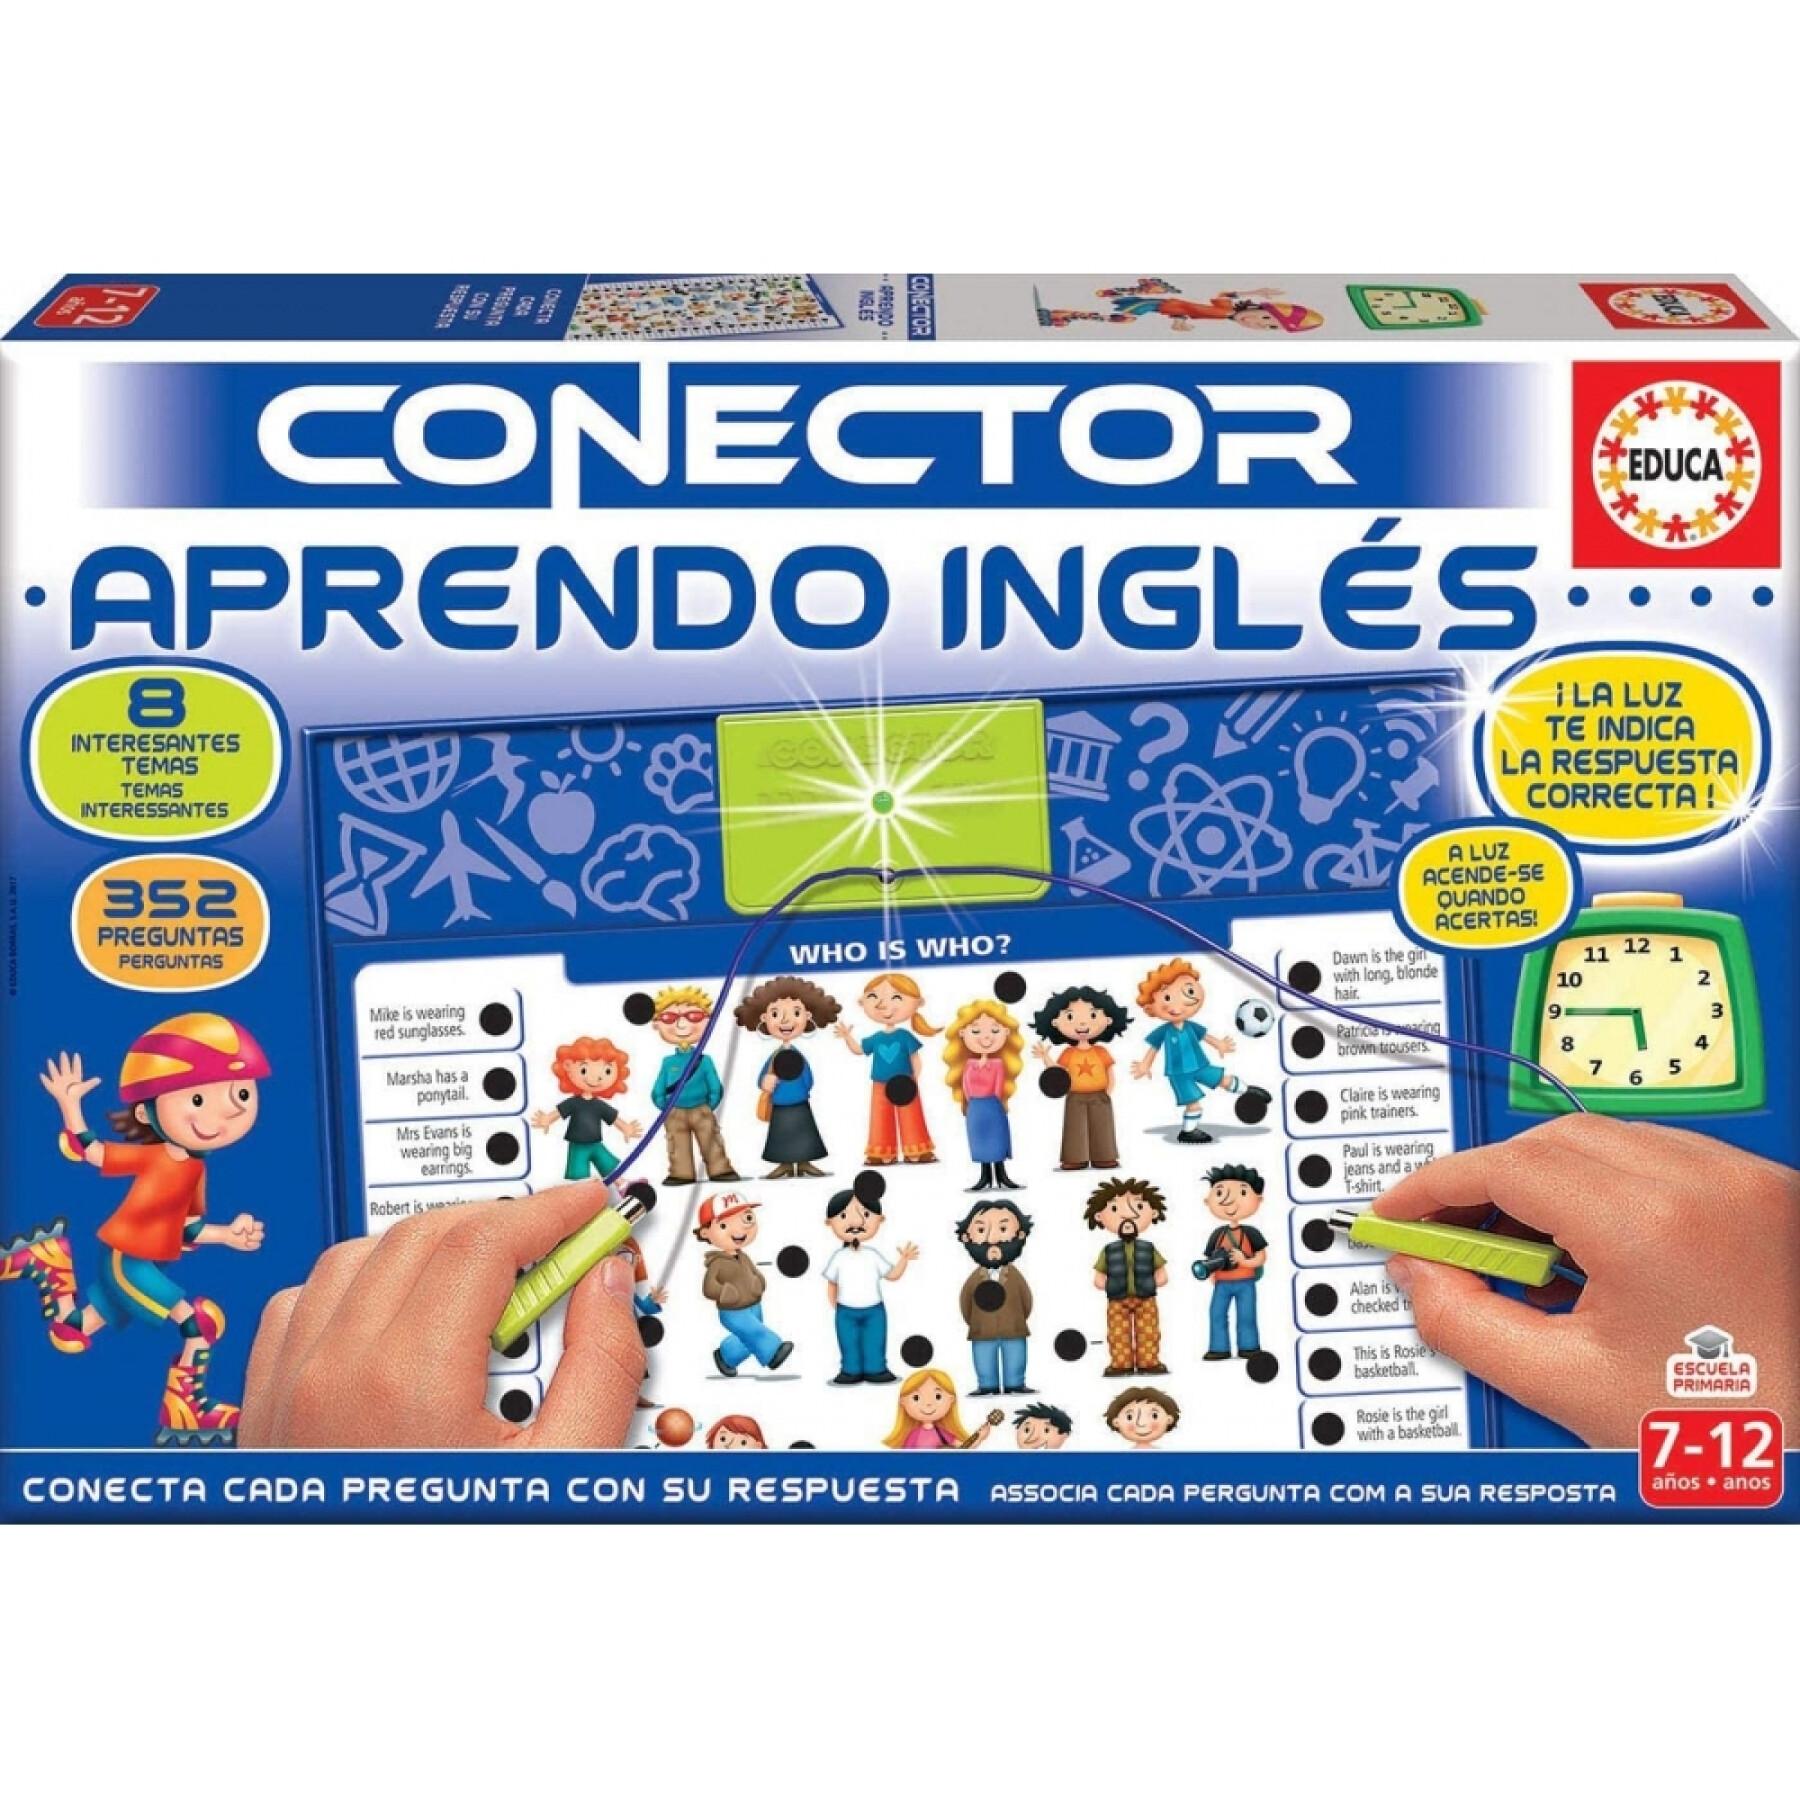 Educational tablet for learning English Educa Conector